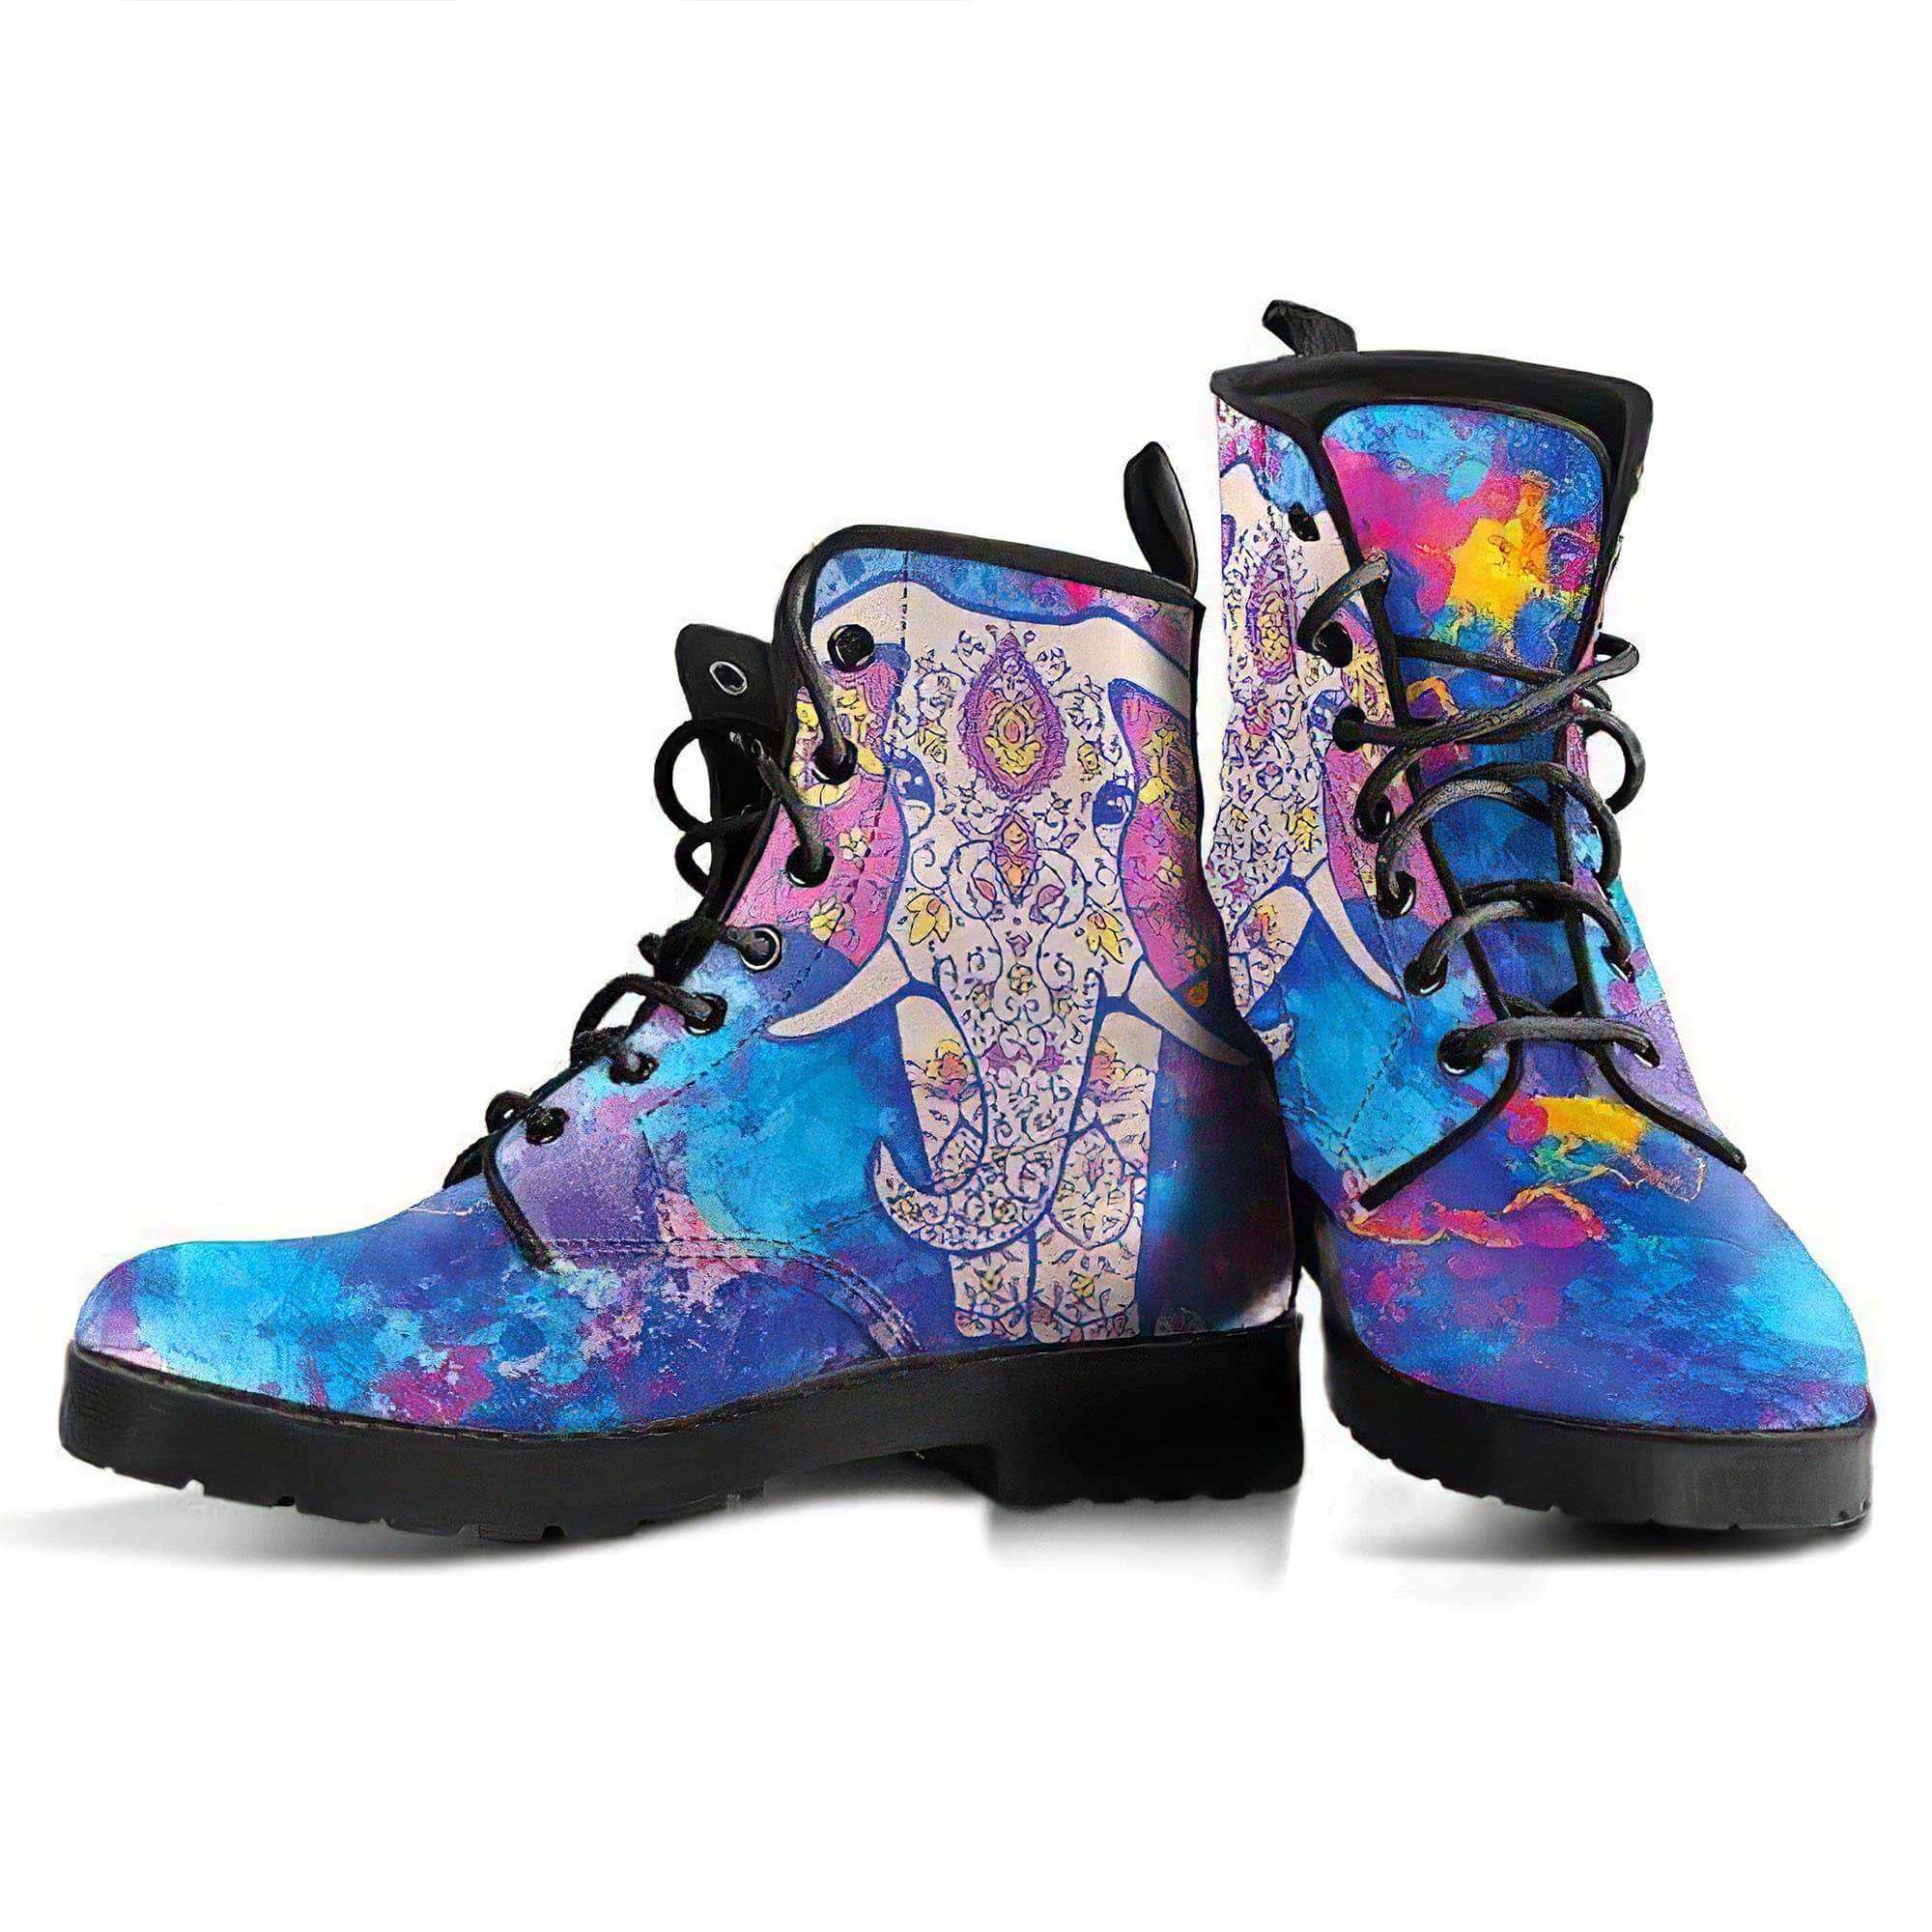 watercolor-elephant-handcrafted-boots-women-s-leather-boots-12051975077949.jpg